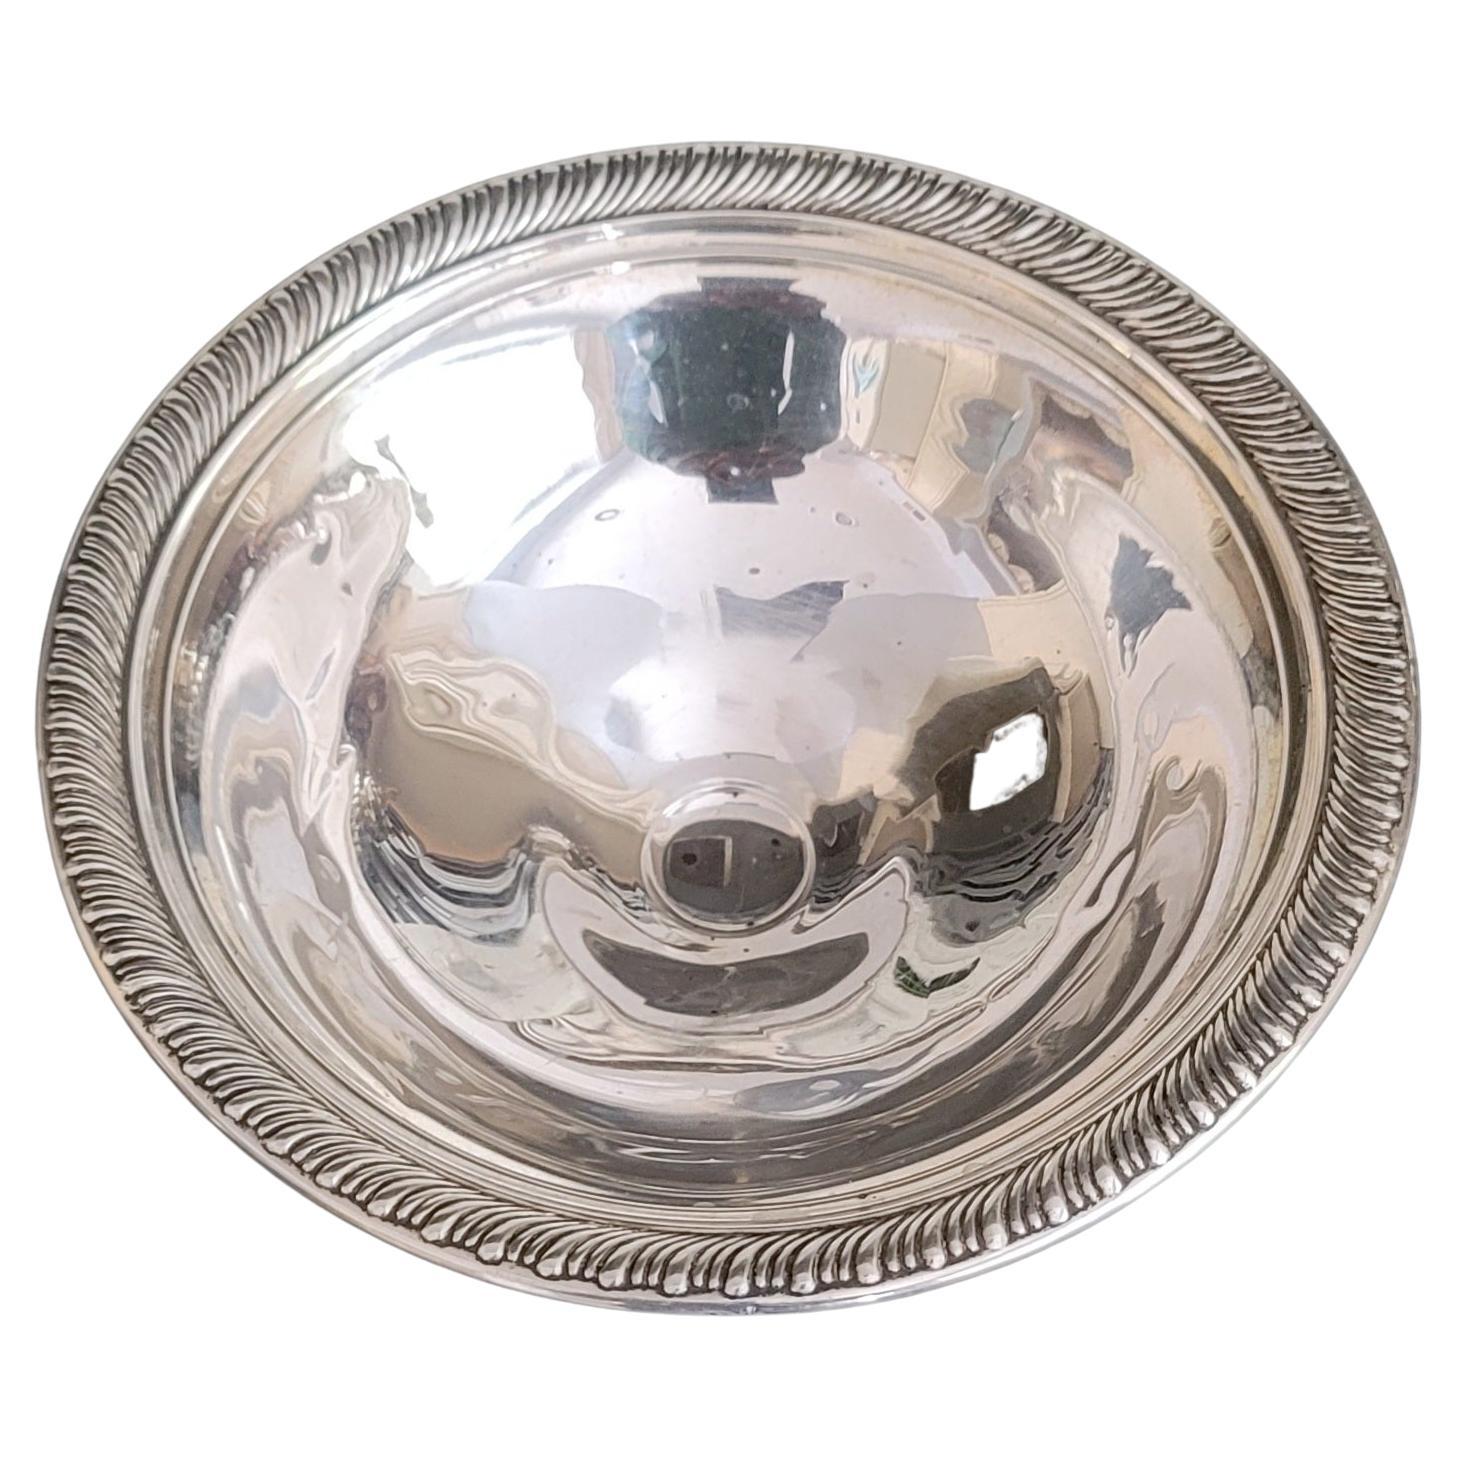 English tested .925 Sterling Silver Compote dish candy. Weighted.
Good condition.